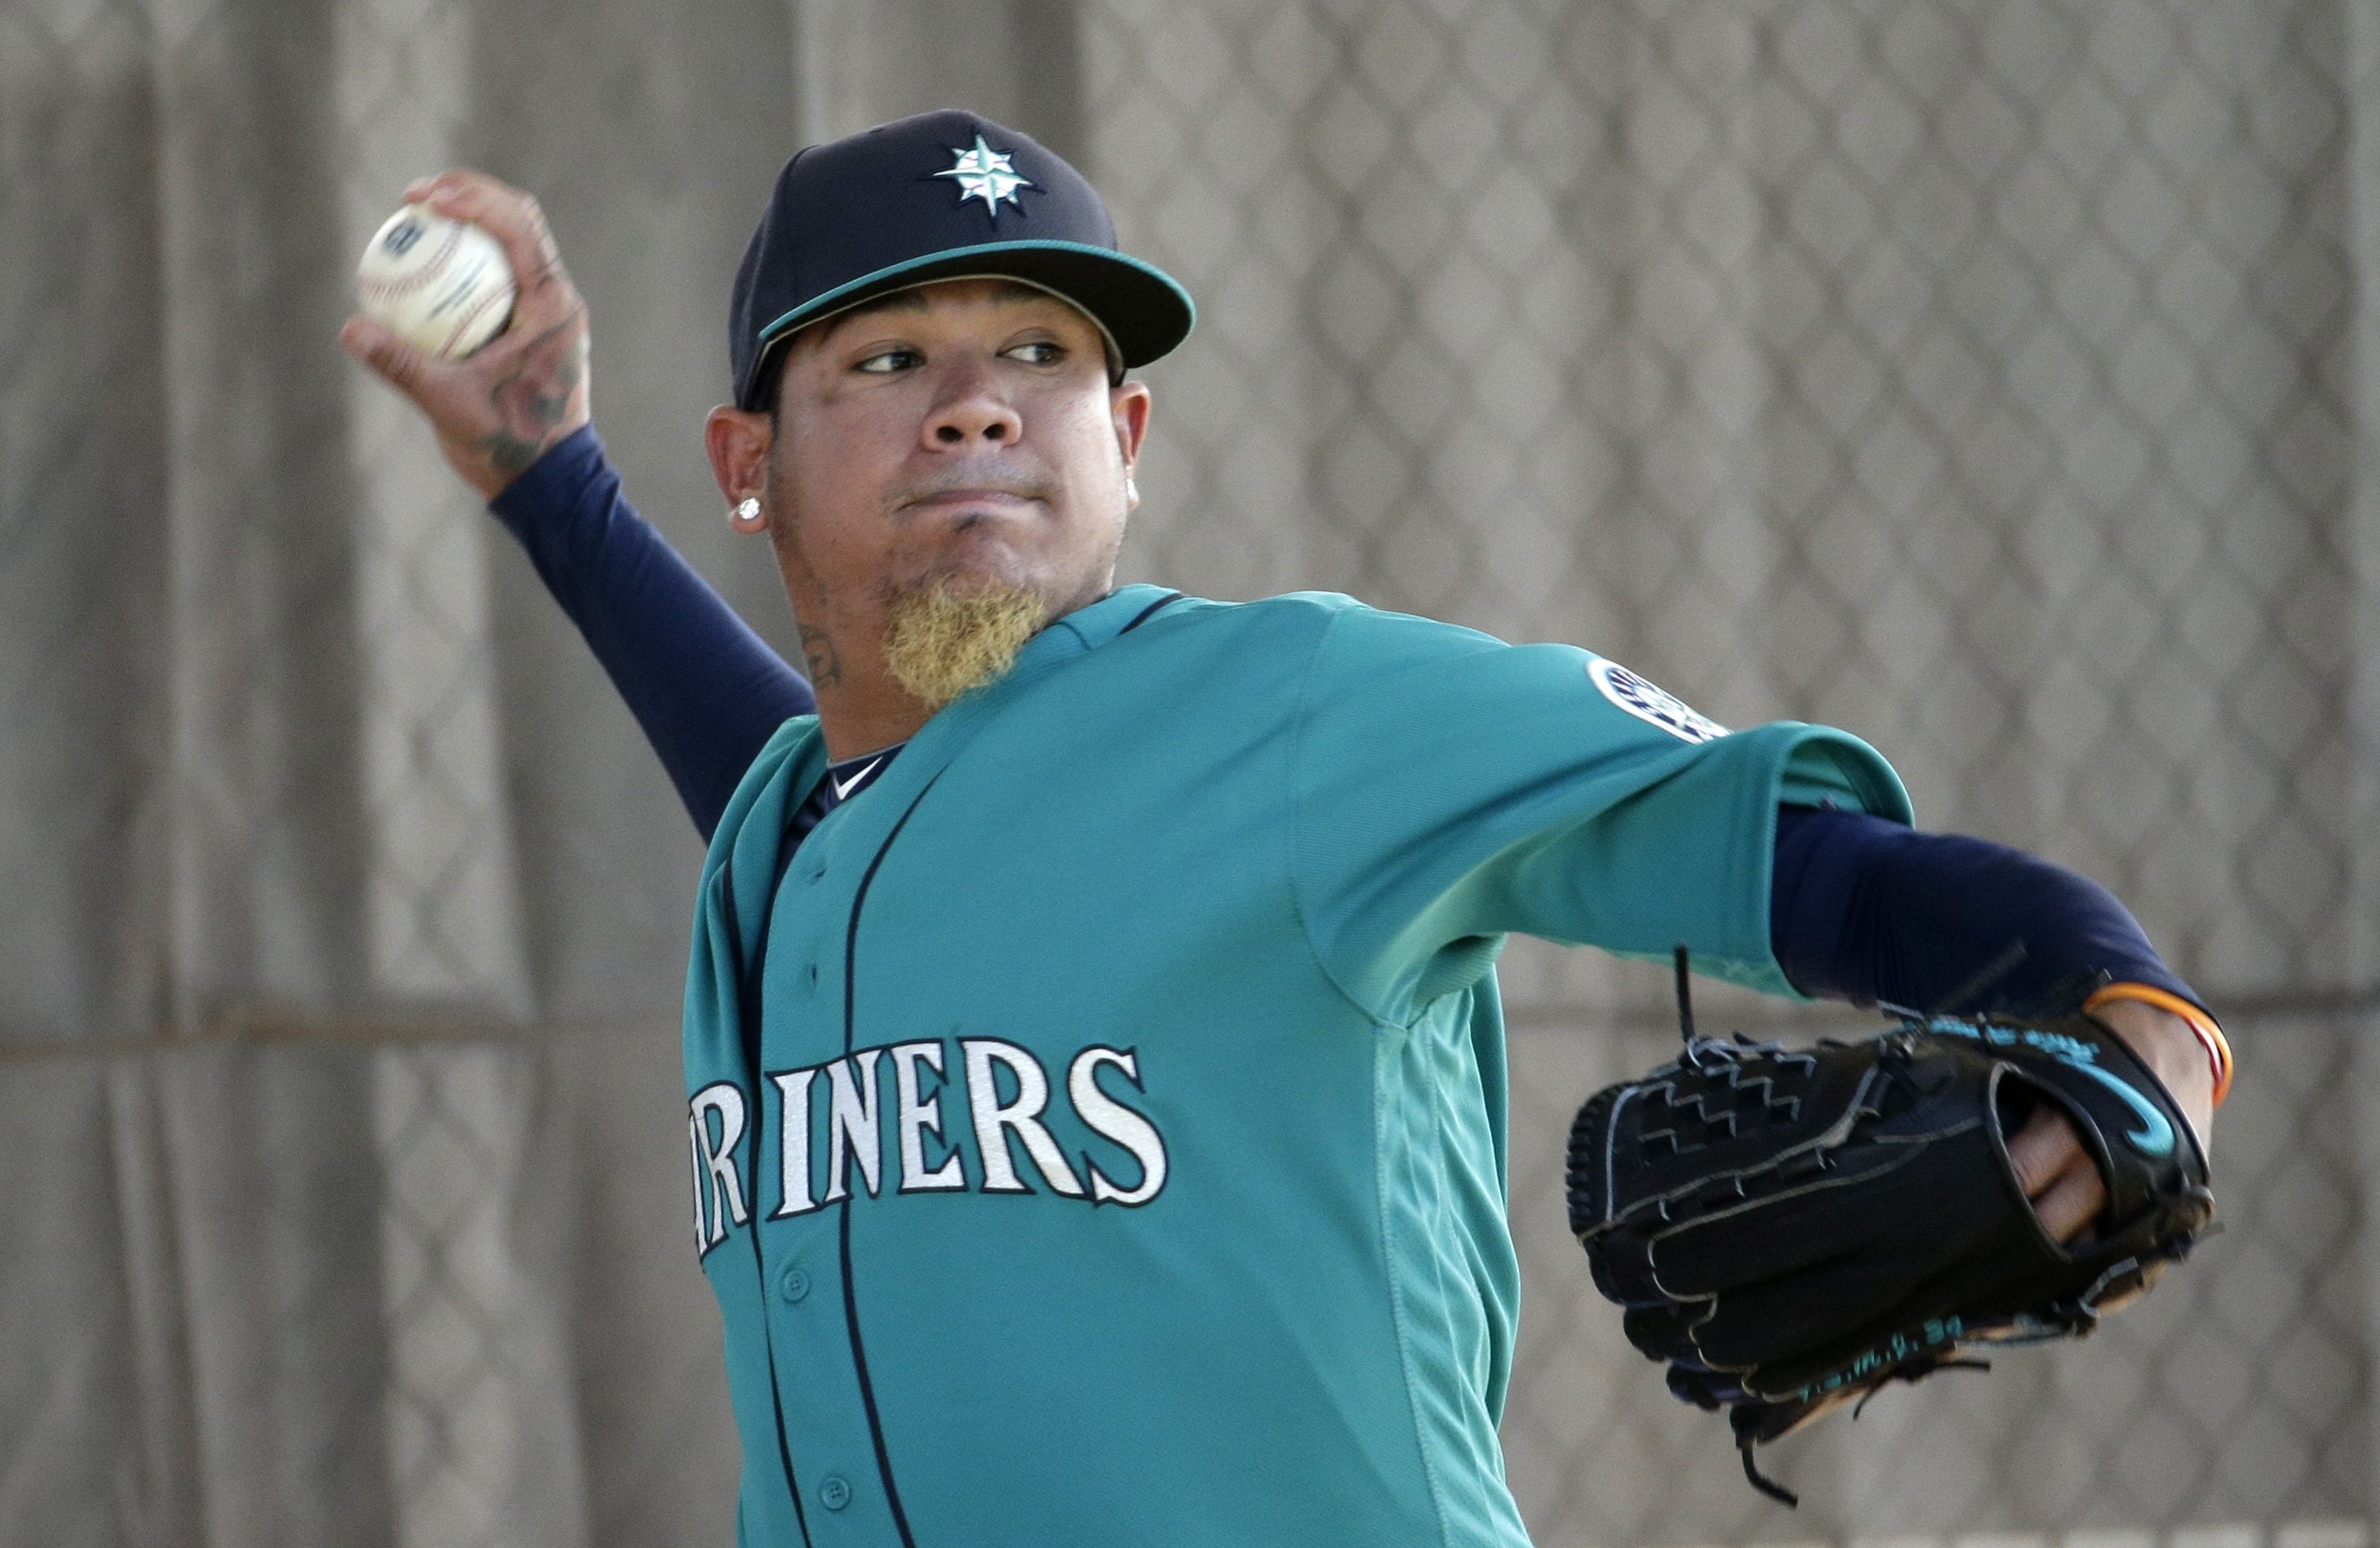 Mariners' ace Hernandez strikes out 5 in spring debut - The Columbian